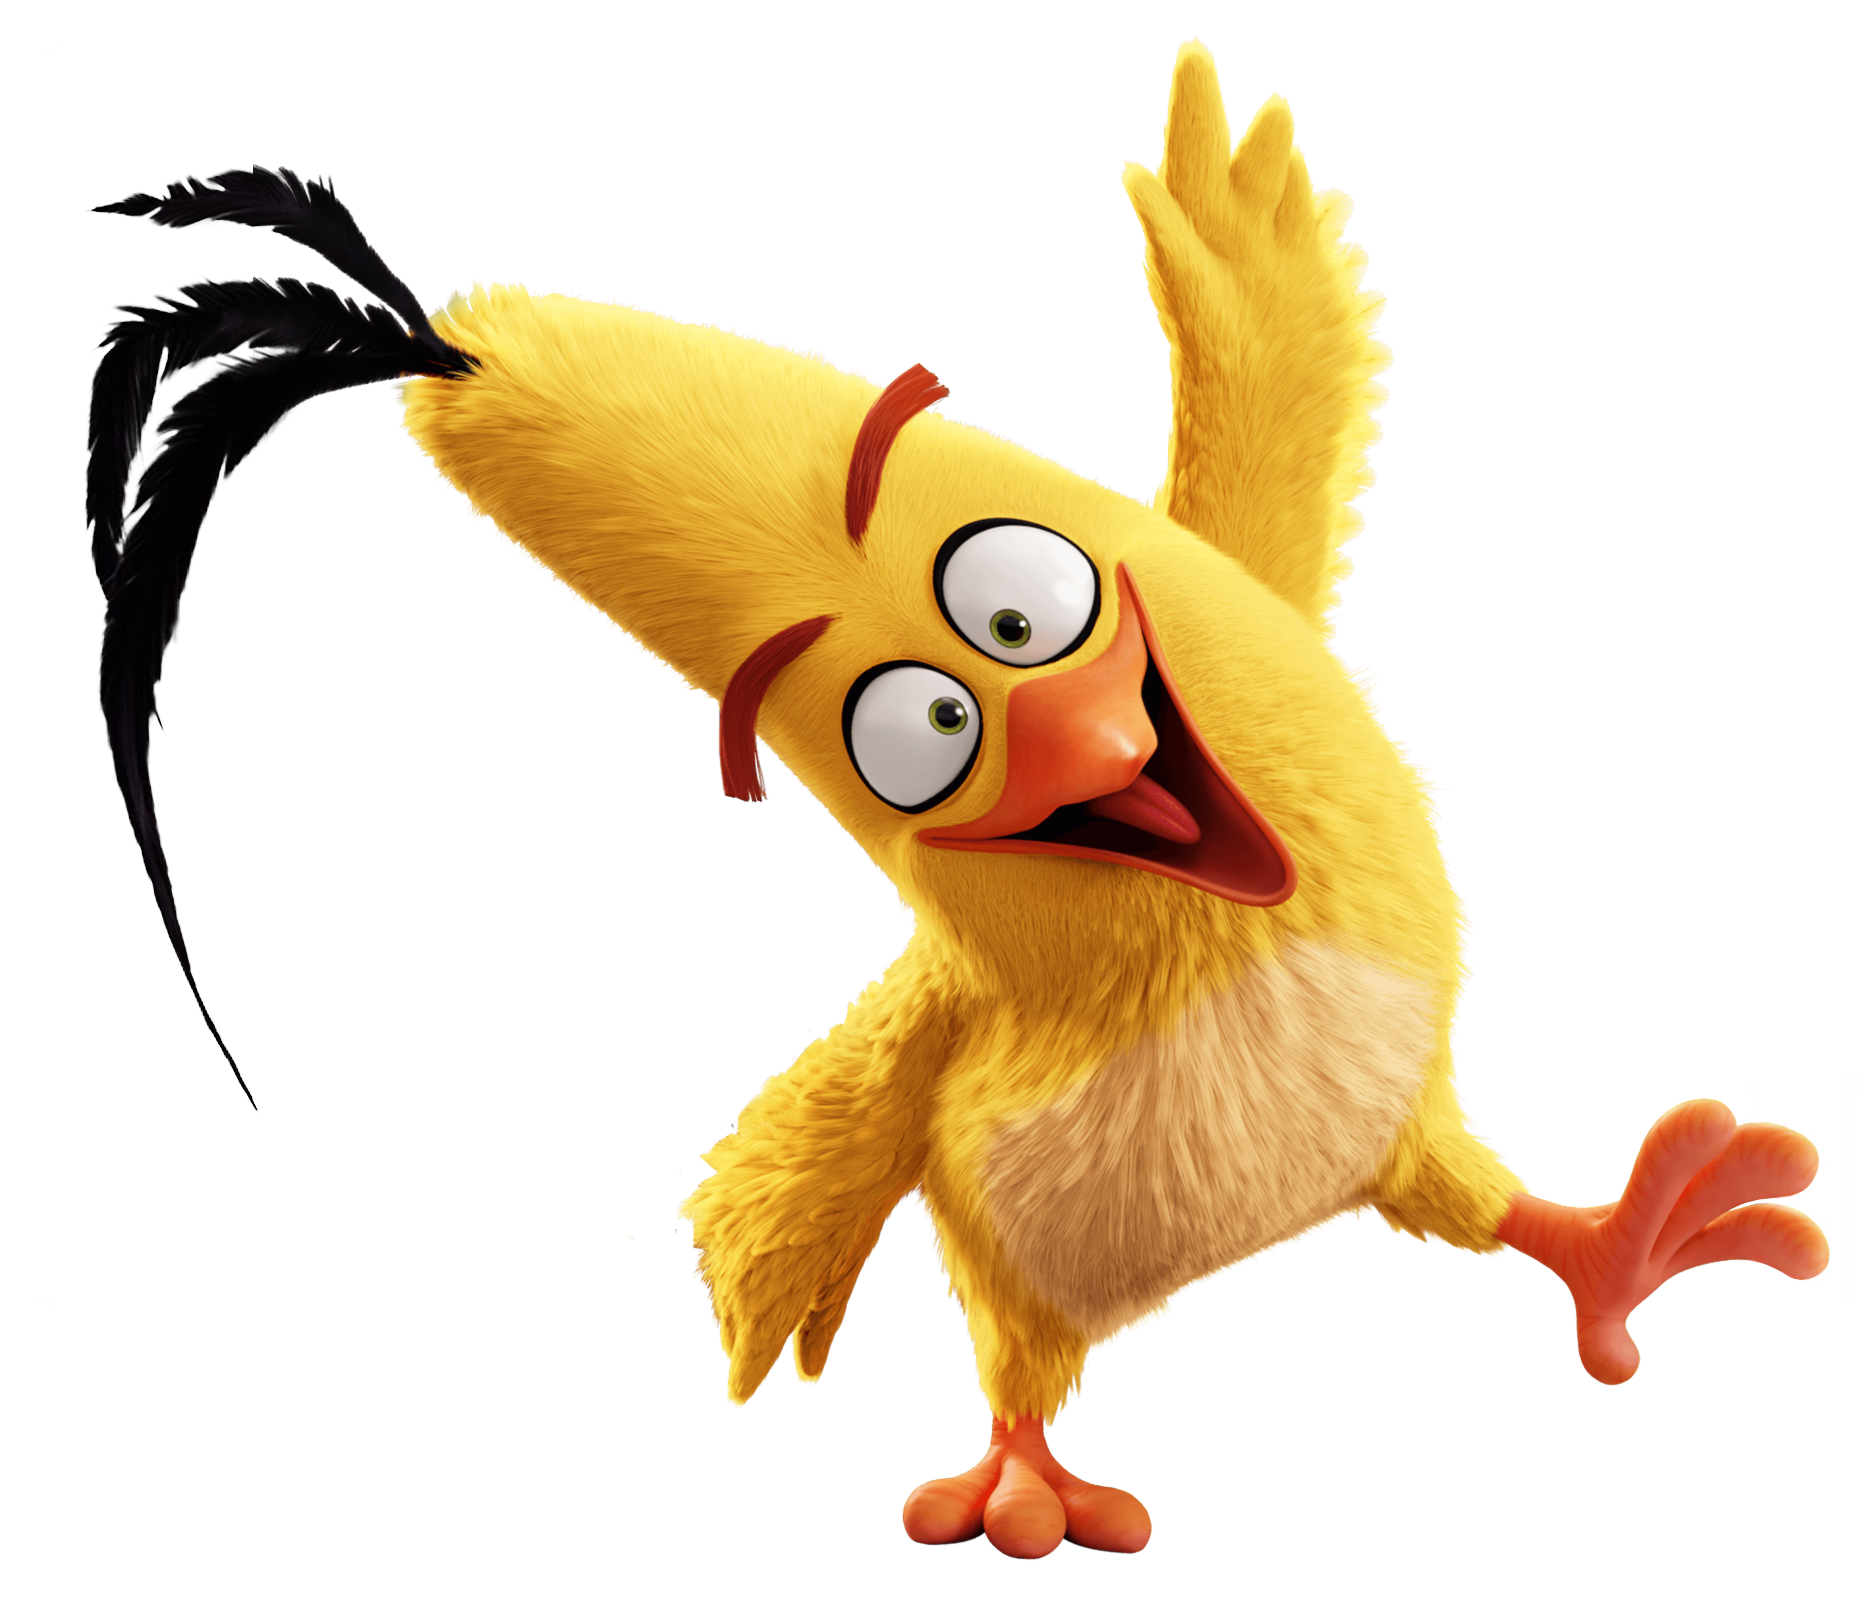 The angry birds movie. Film clipart cute